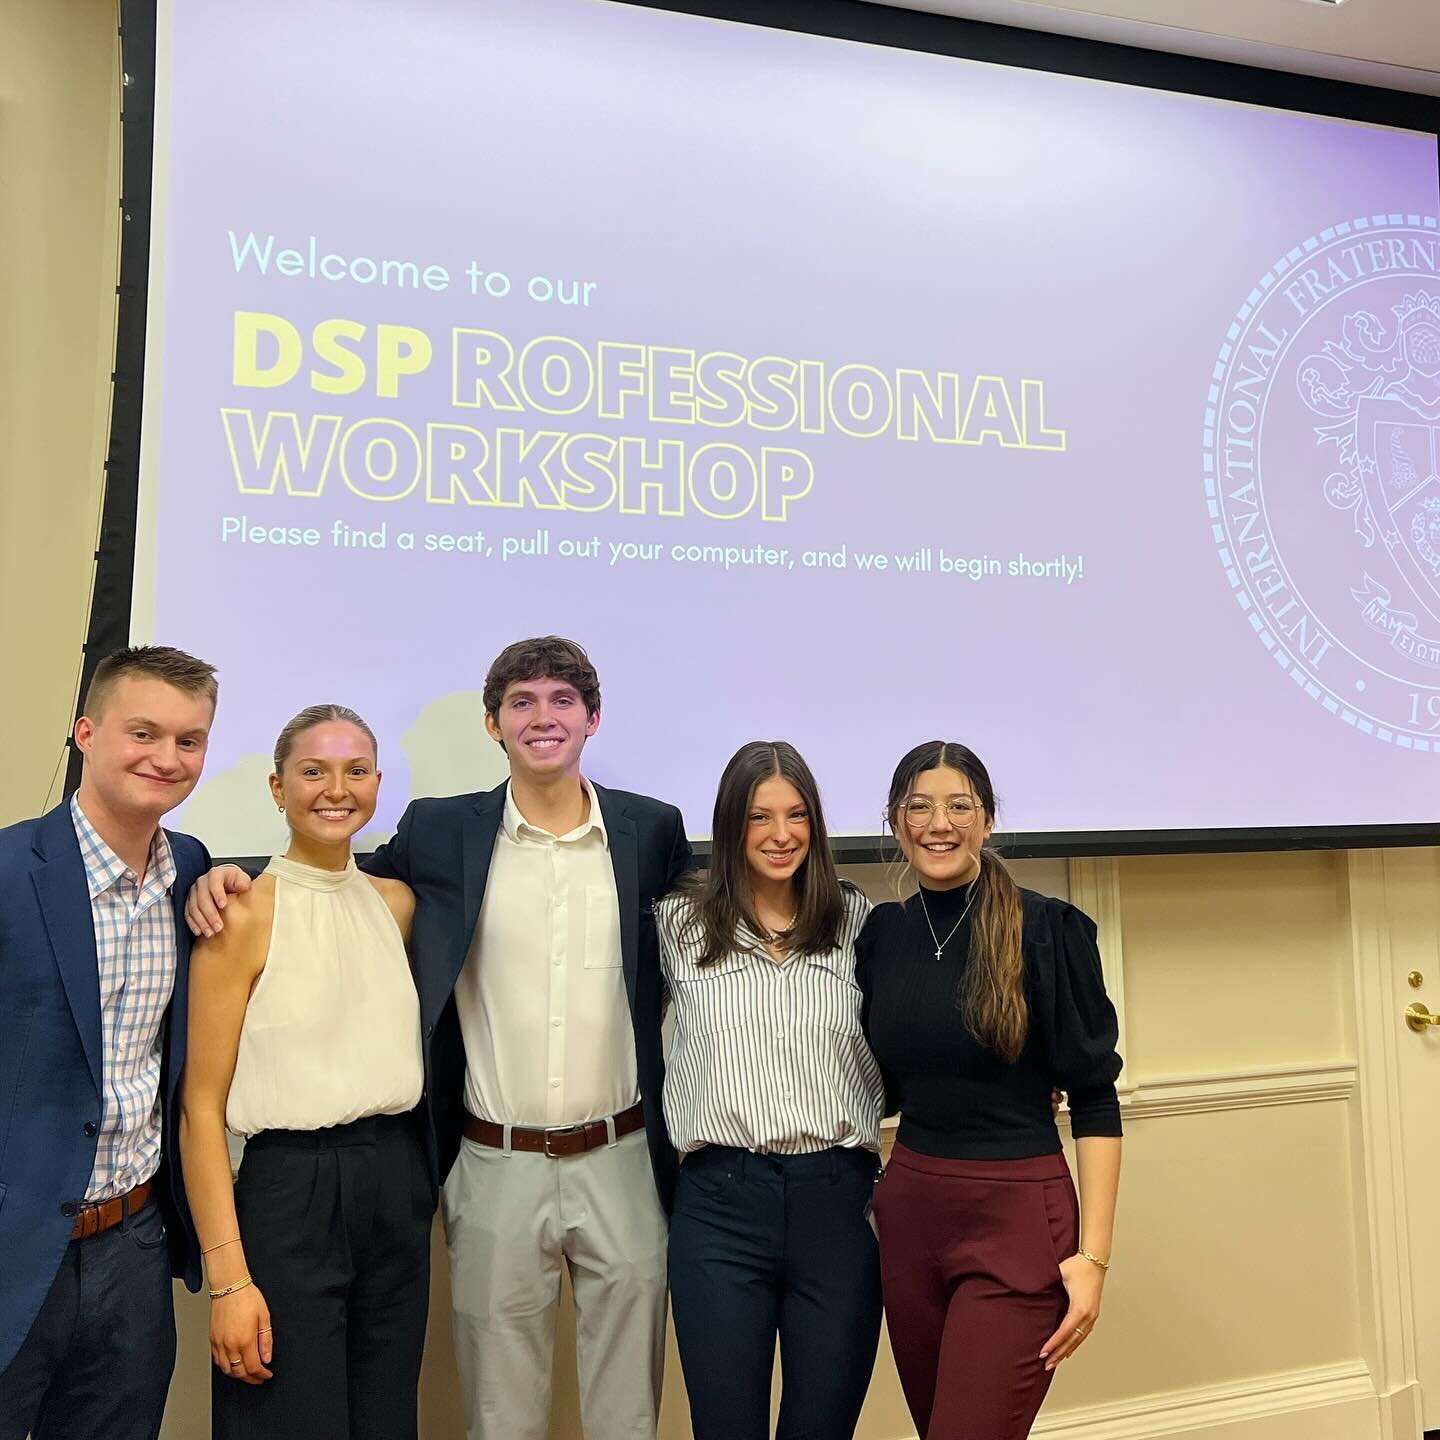 Last Friday, we held our DSP Professional Development Showcase! This event showcased all of the wonderful professional opportunities that a DSP has to offer. In addition to interview help and resume review, Brothers talked about major-specific career